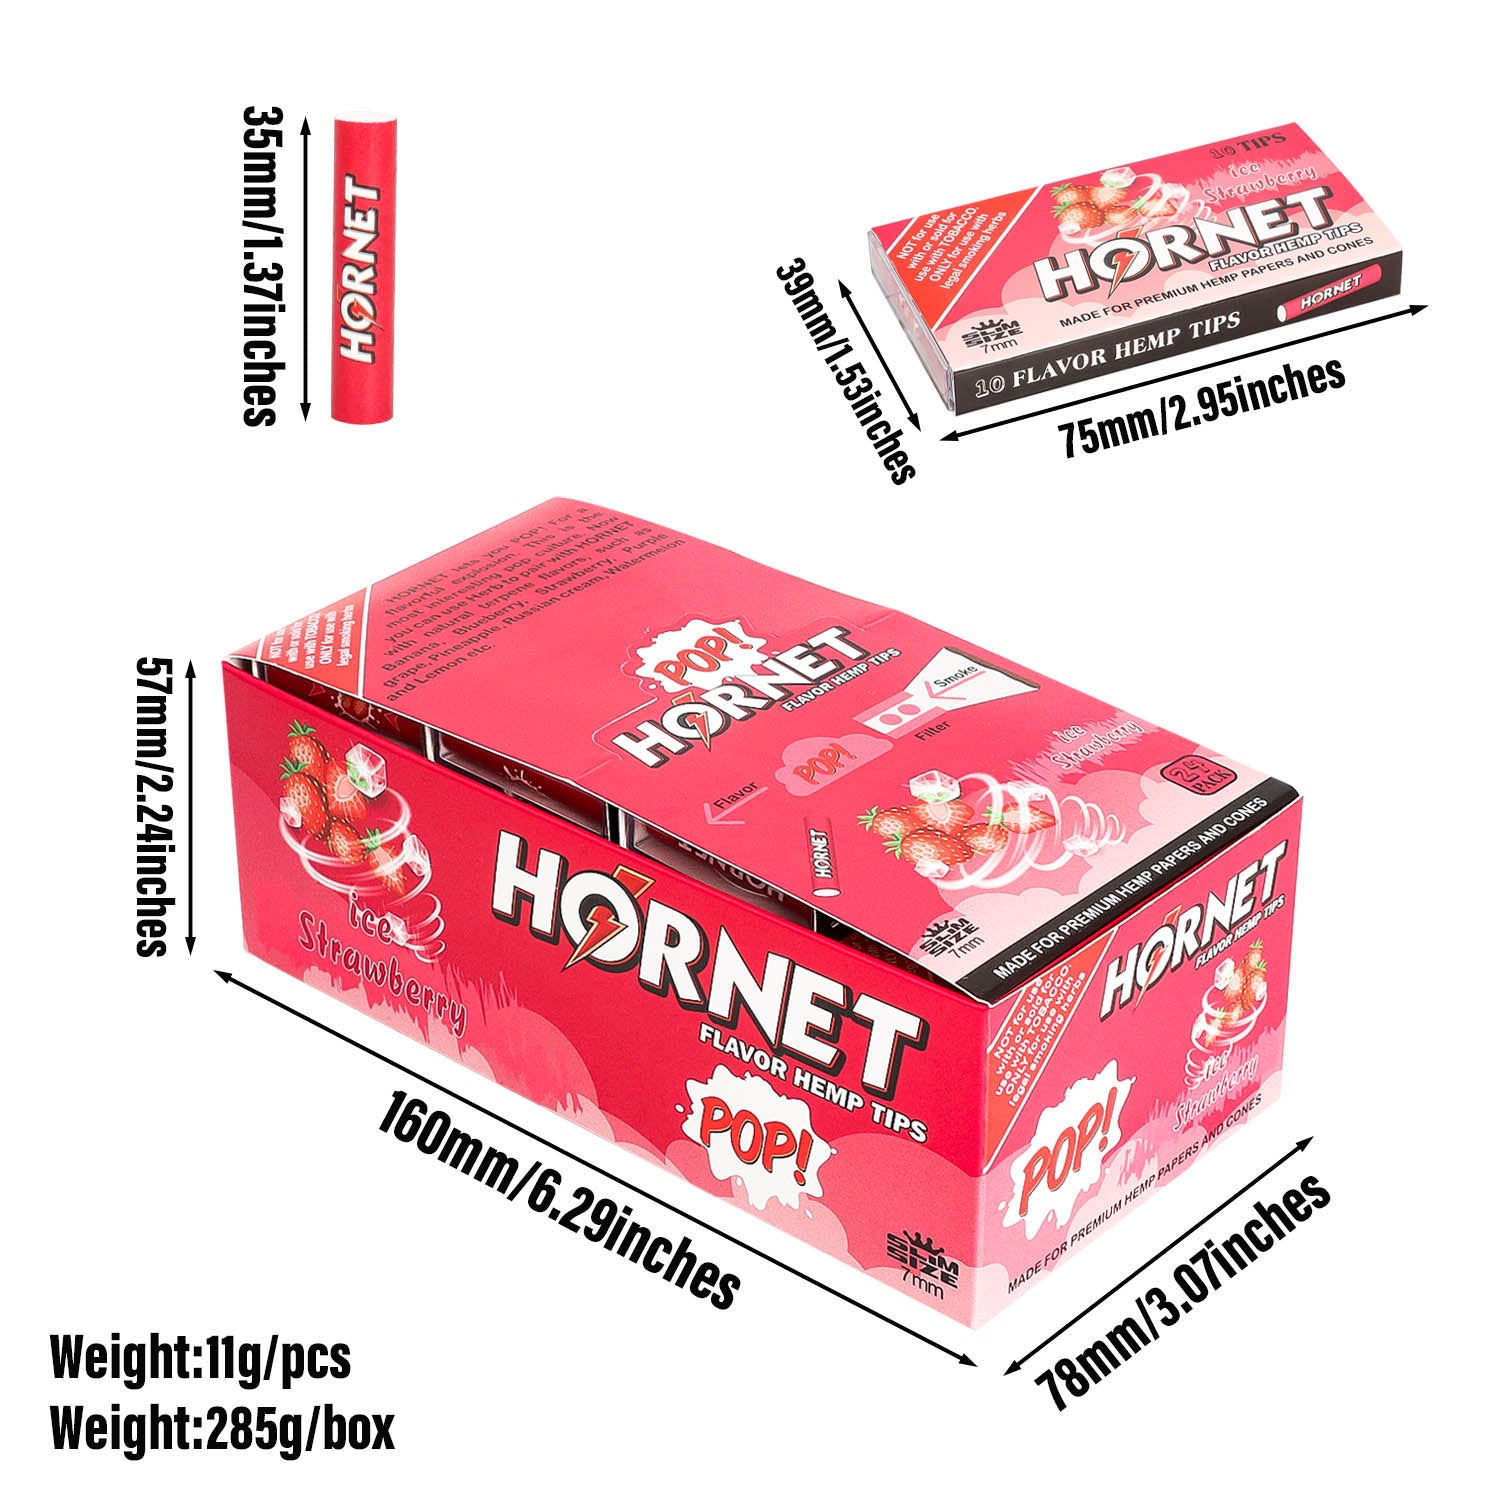 HORNET Strawberry Flavors Filter Tips with Flavored Pop, 7 mm Filter Tips, 10 Tips / Pack 24 Packs / Box